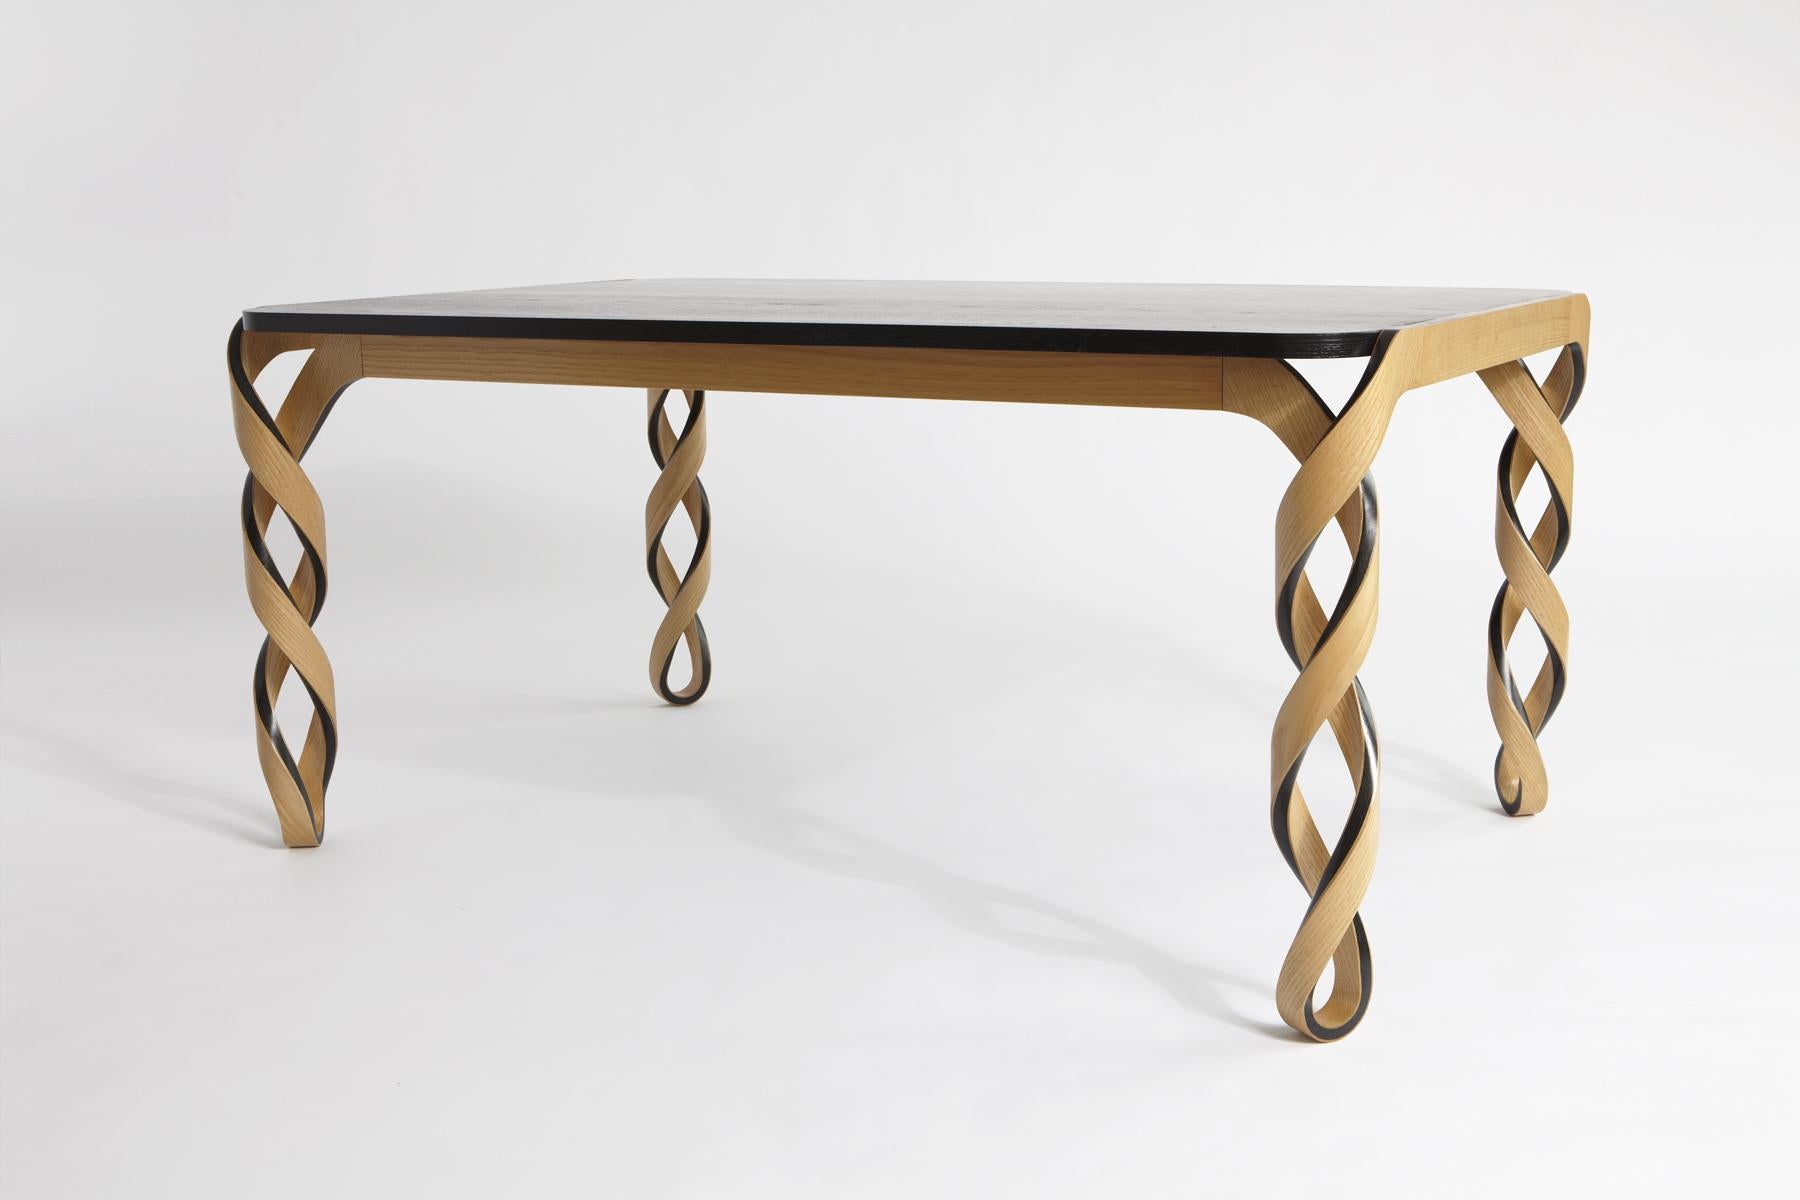 The Watson table is named after James Watson, the American scientist famous for discovering the helical structure of DNA. The form is inspired by English furniture of the late 1600s, with it’s distinctive open wood turnings, sometimes called “barley